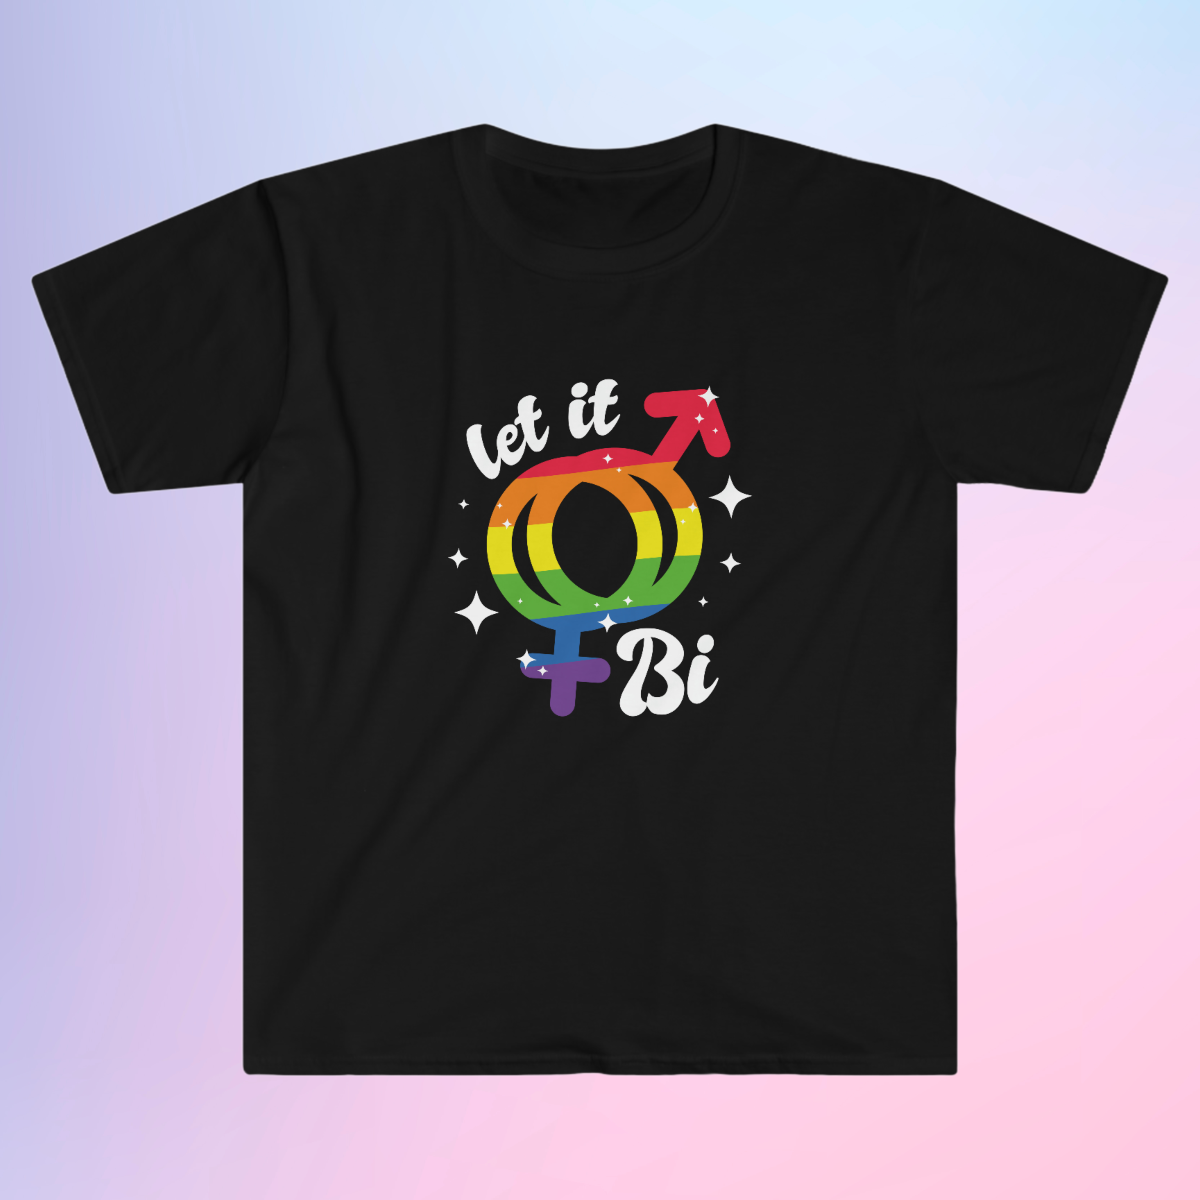 A black Let it Bi T-shirt that proudly displays the phrase "Let it Bi" alongside the bi flag, celebrating and embracing one's bi-curious side.